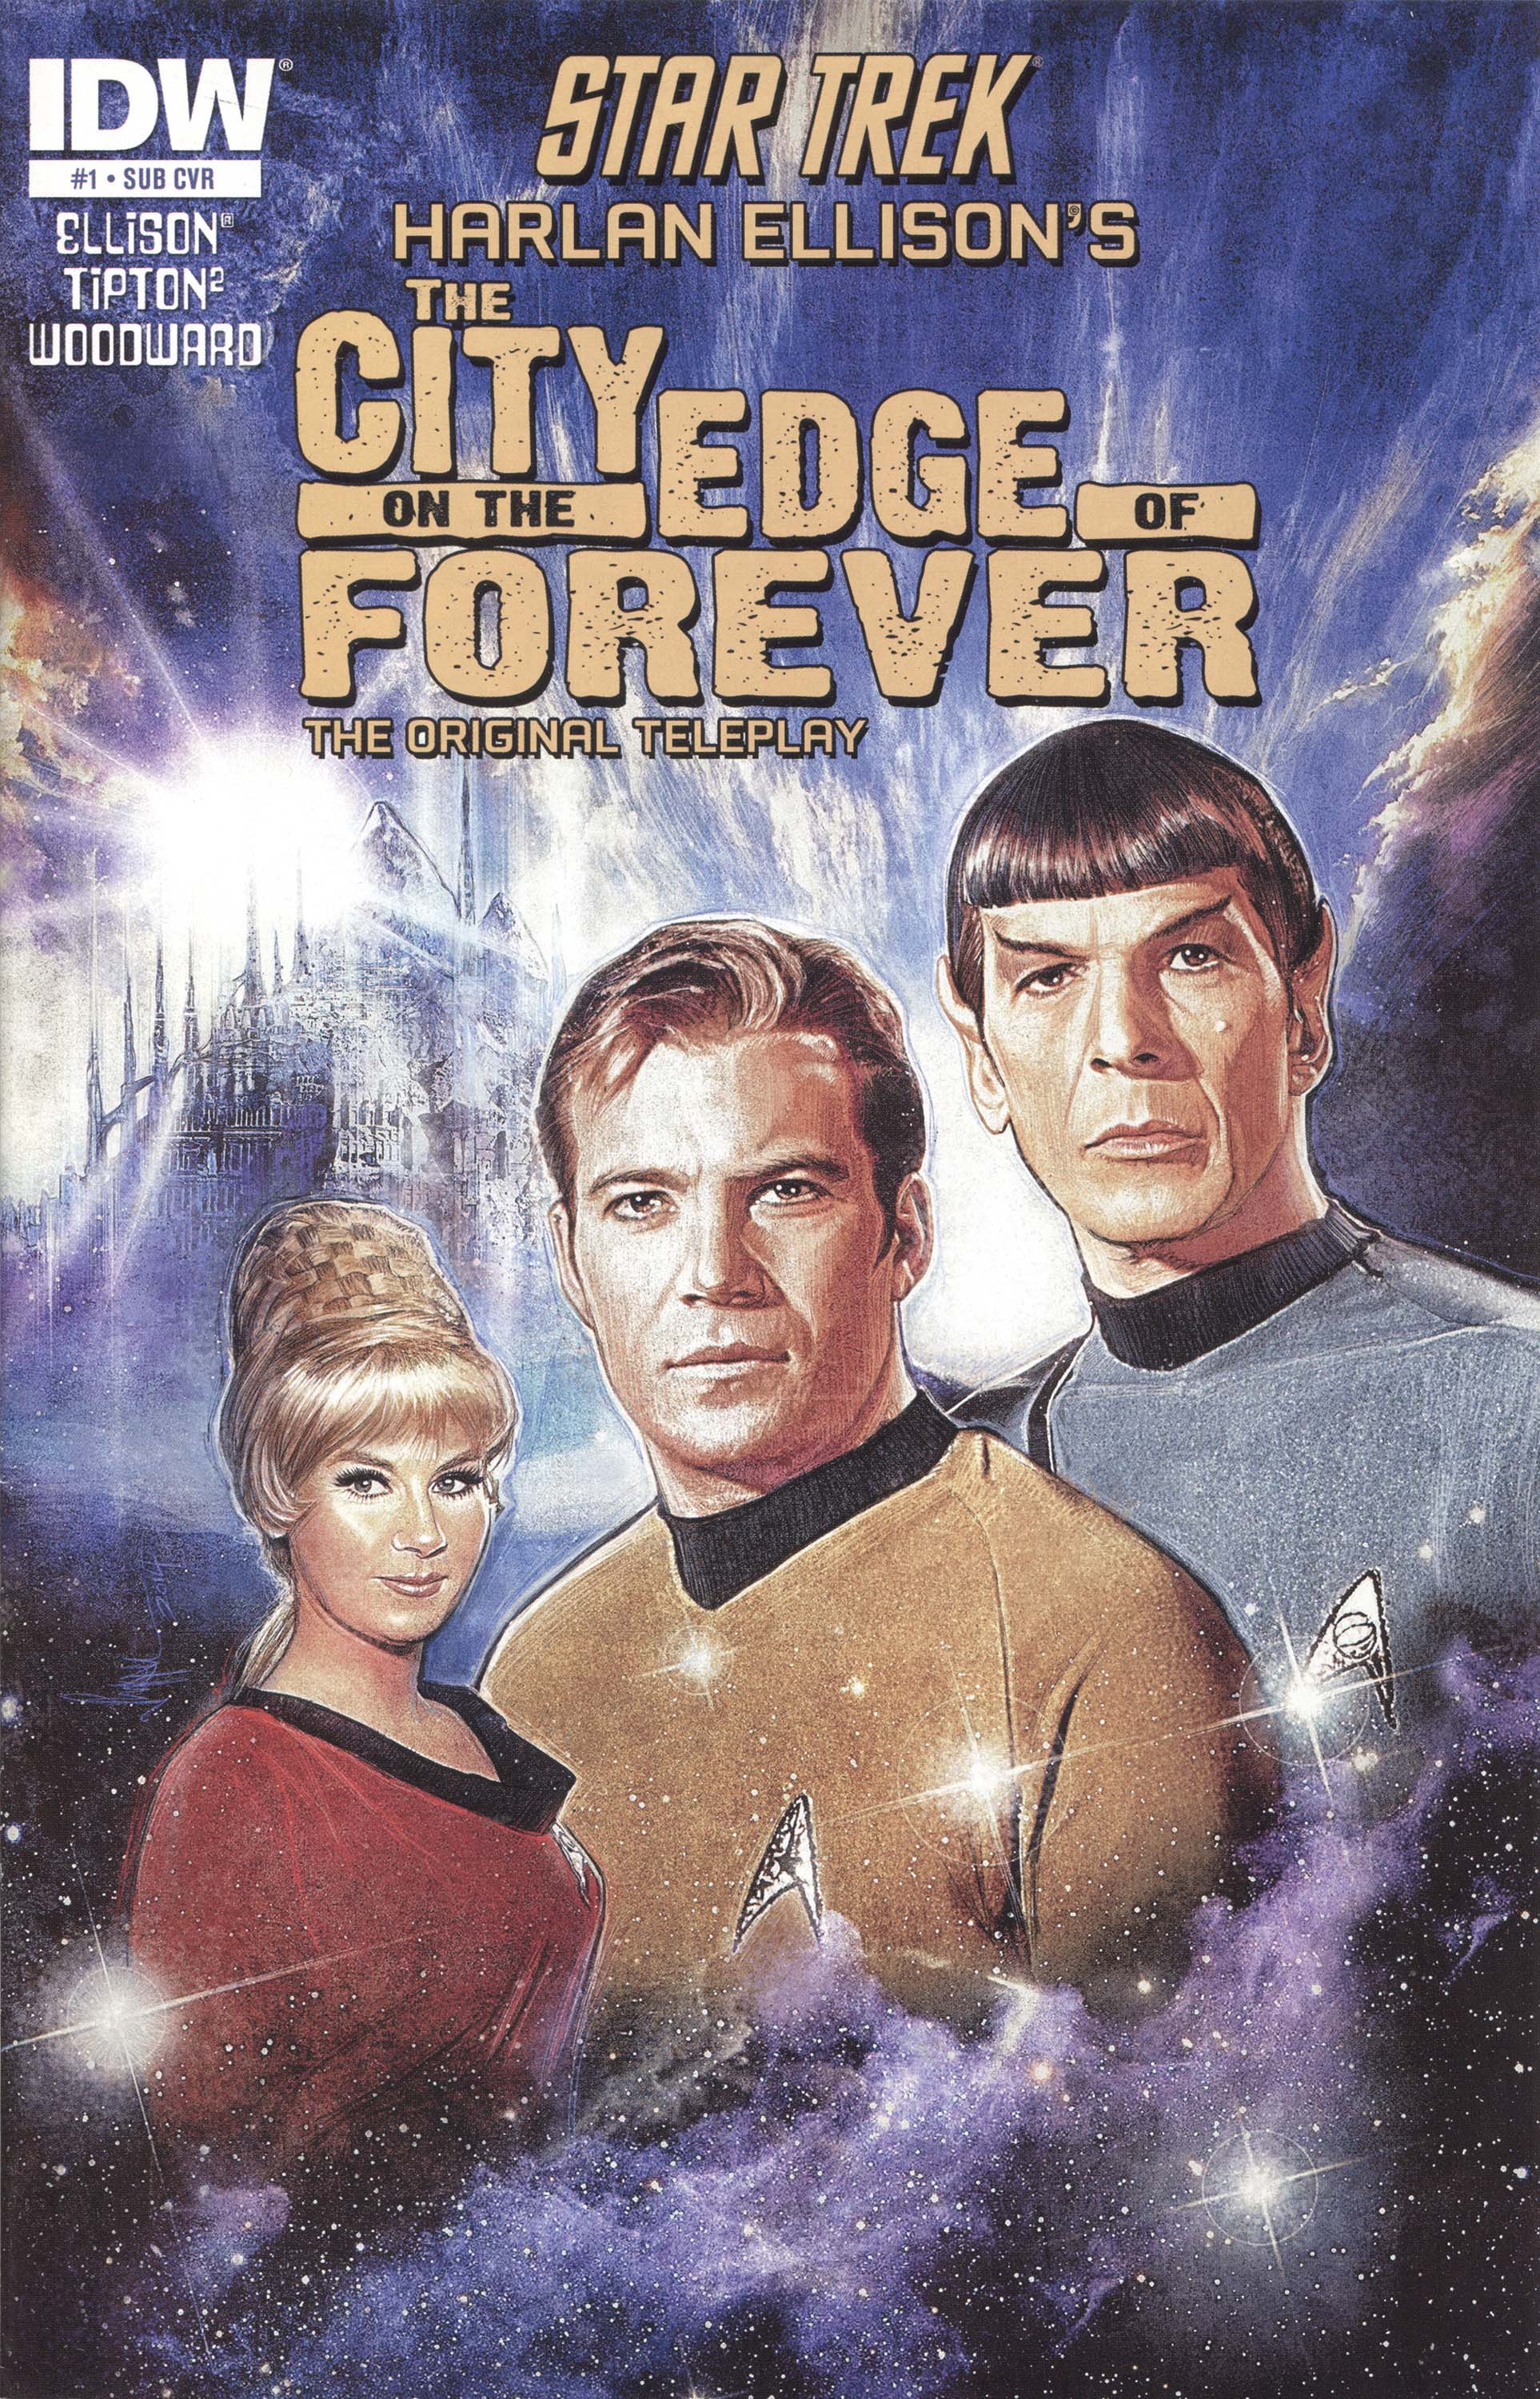 The City On The Edge Of Forever #1, subscriber cover, art by Paul Shipper